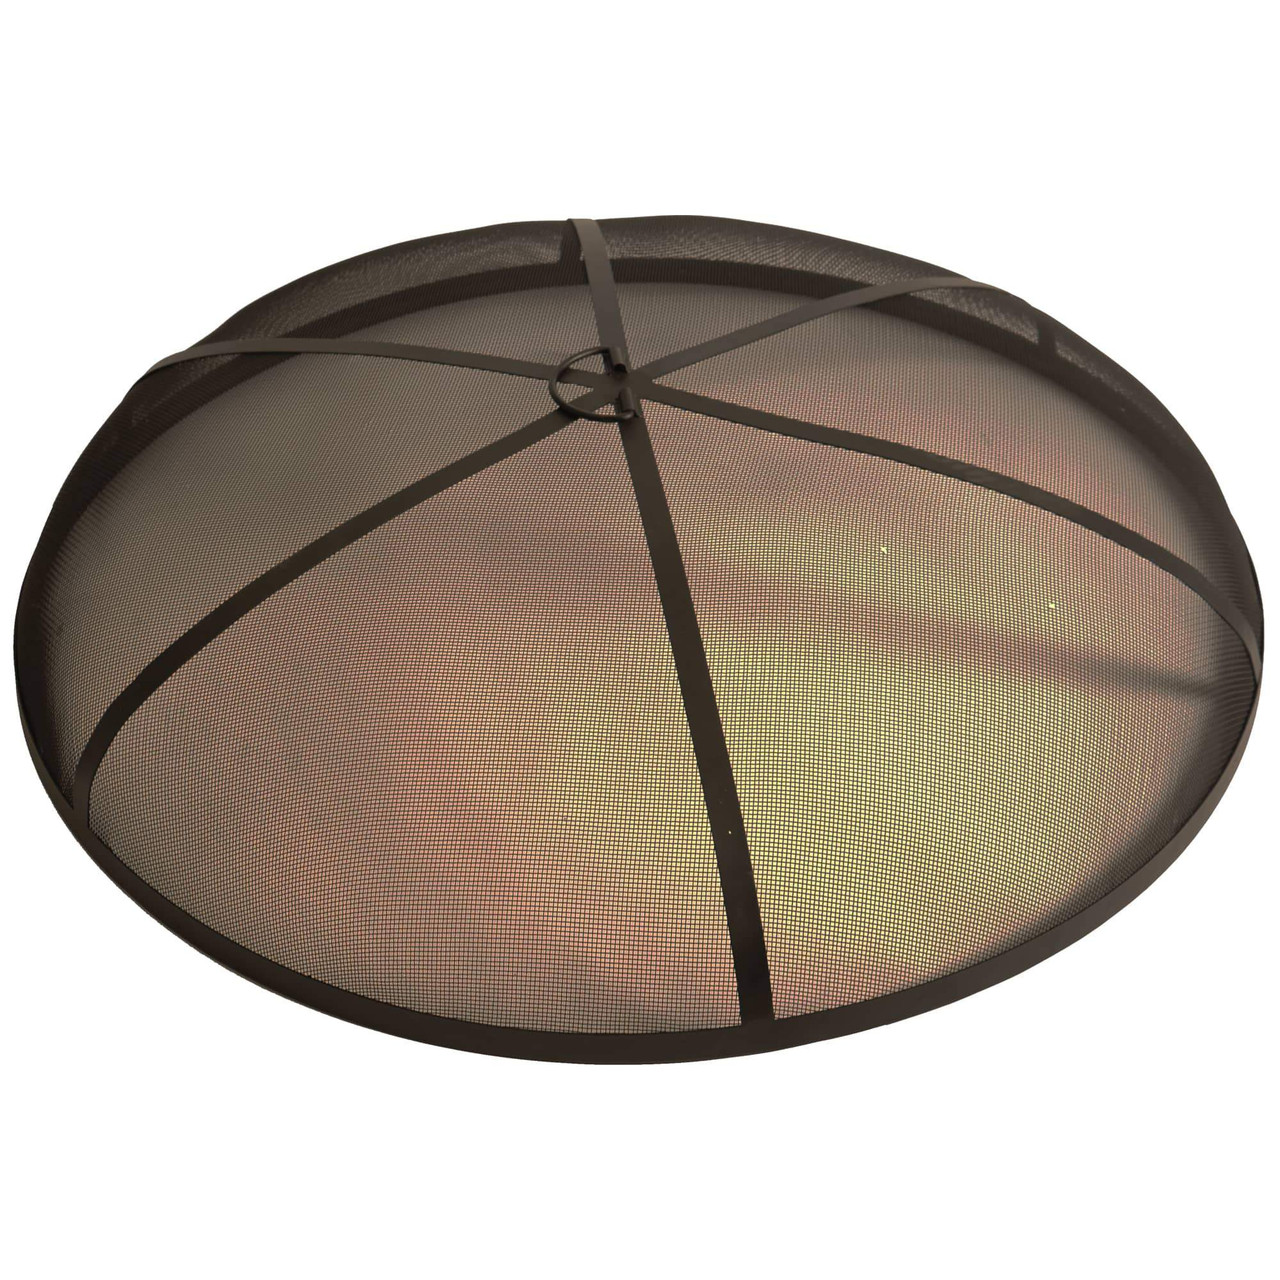 Bluegrass Living 36 Inch Steel Fire Pit Spark Screen Cover - Model# BSS-36  - Factory Buys Direct